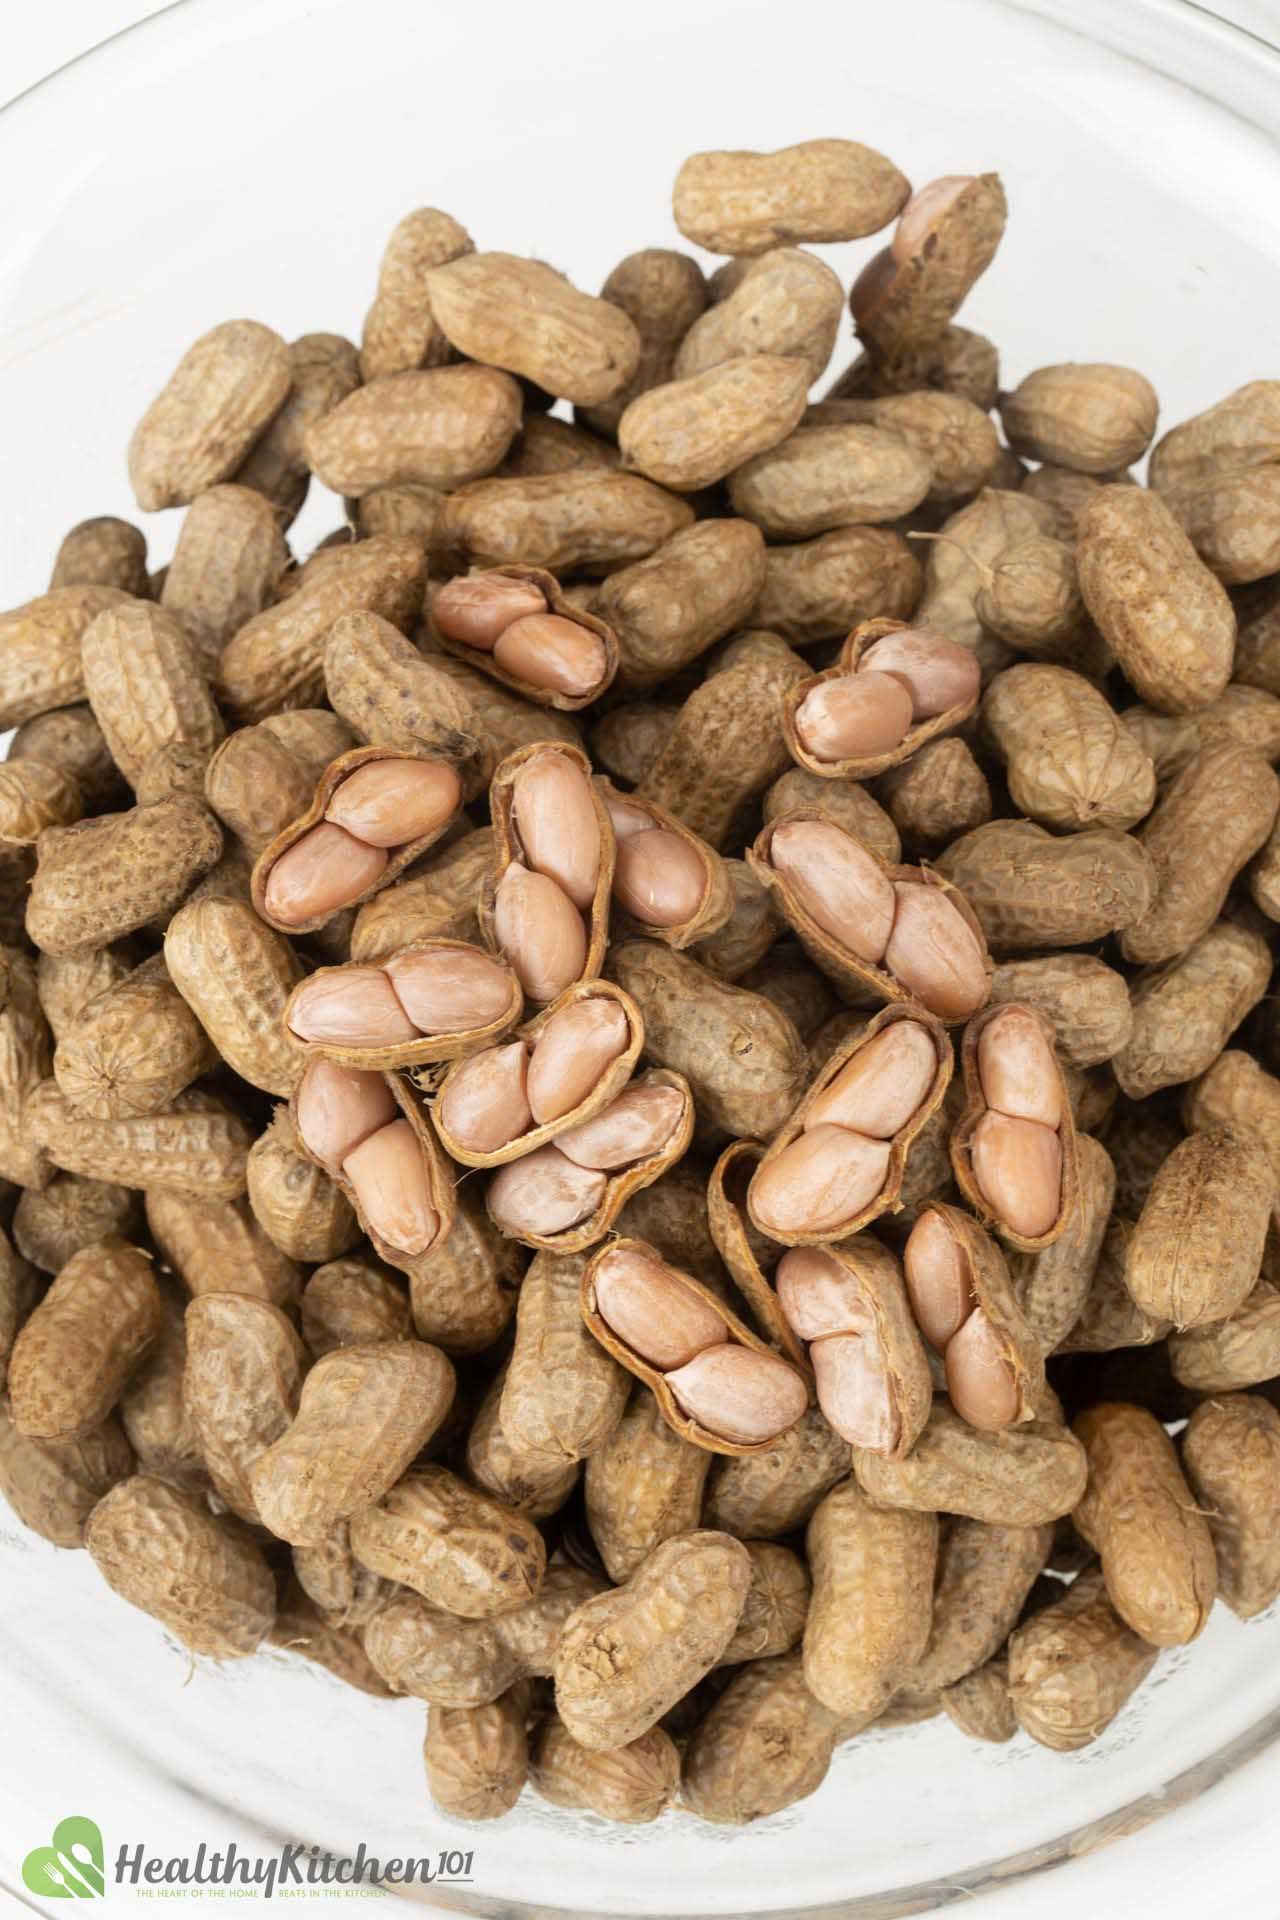 how to eat boiled peanuts